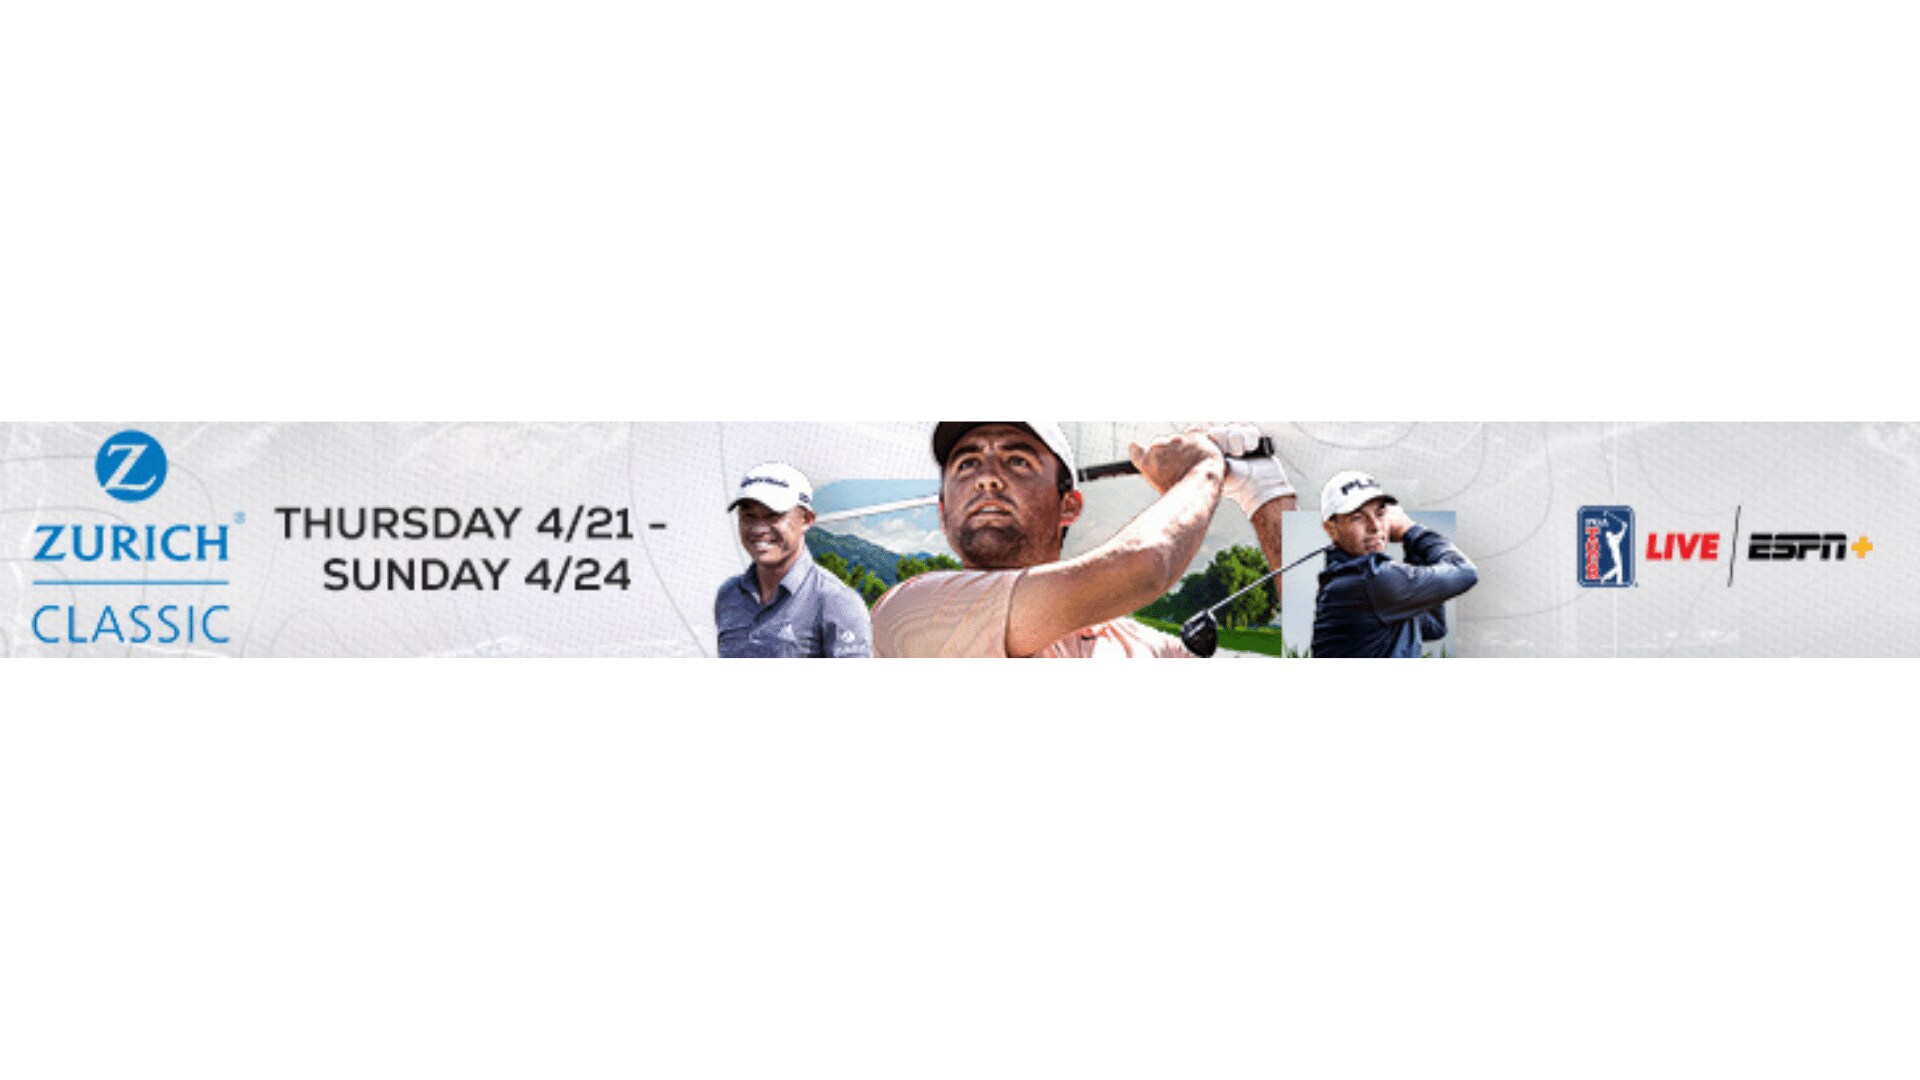 Exclusively on ESPN+: PGA TOUR LIVE Four-Stream Coverage of Zurich Classic of New Orleans at TPC Louisiana